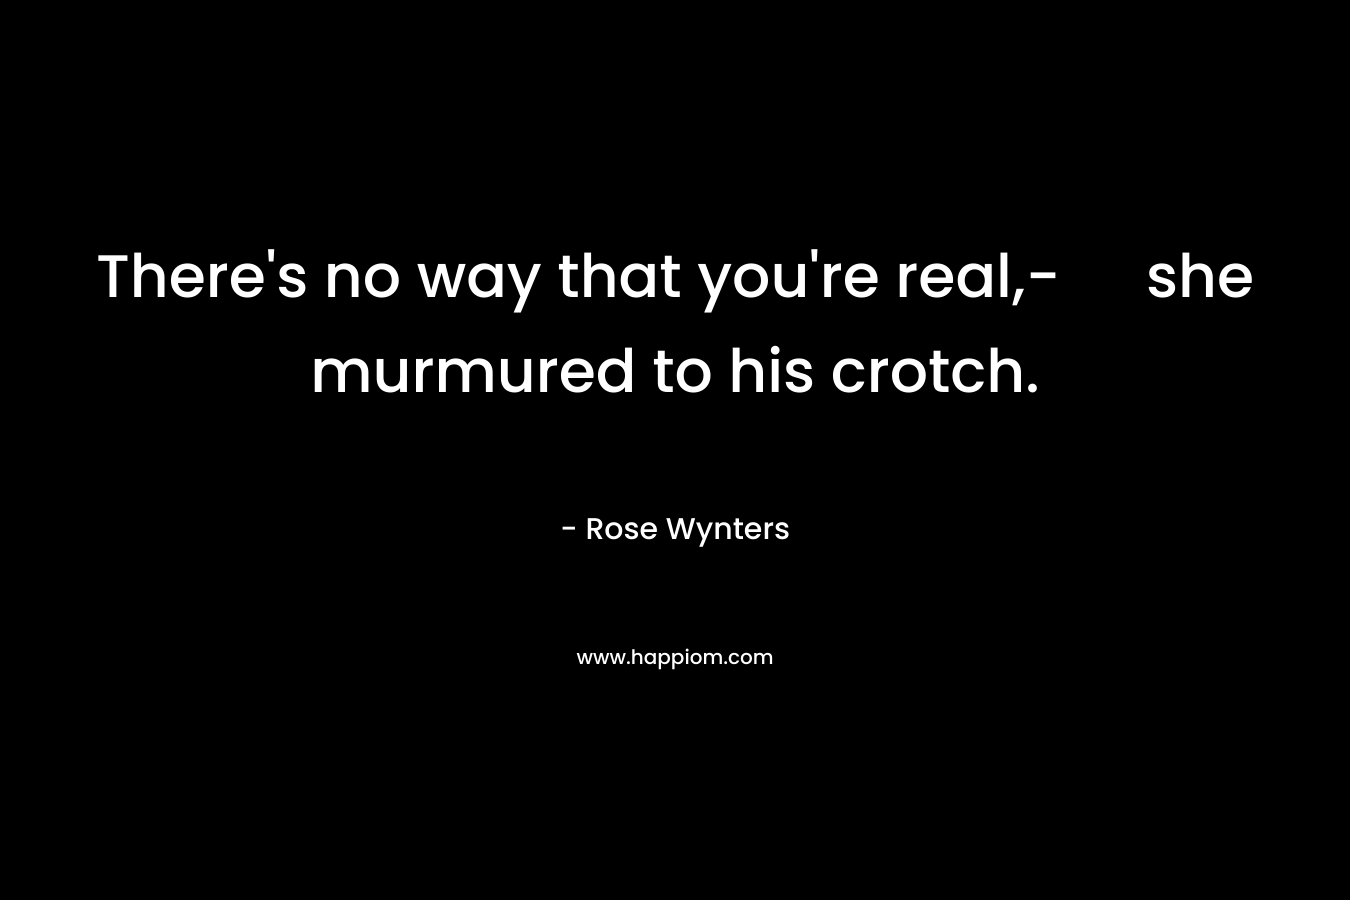 There’s no way that you’re real,- she murmured to his crotch. – Rose Wynters